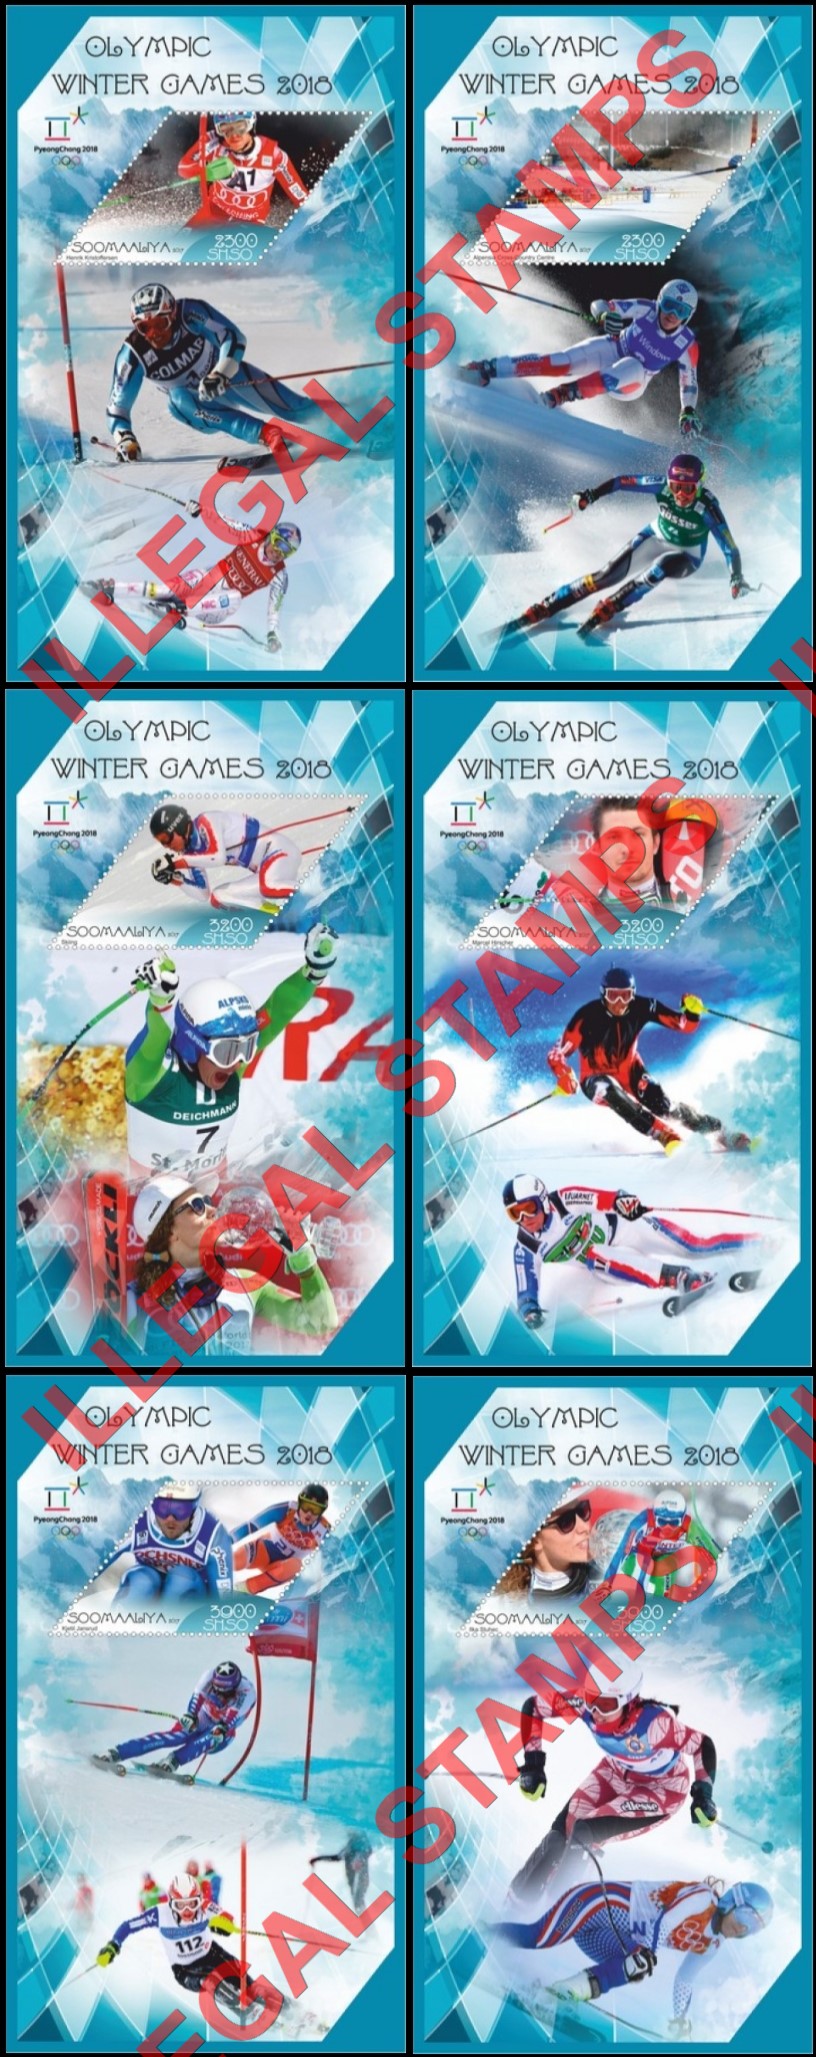 Somalia 2017 Winter Olympic Games in PyeongChang 2018 Illegal Stamp Souvenir Sheets of 1